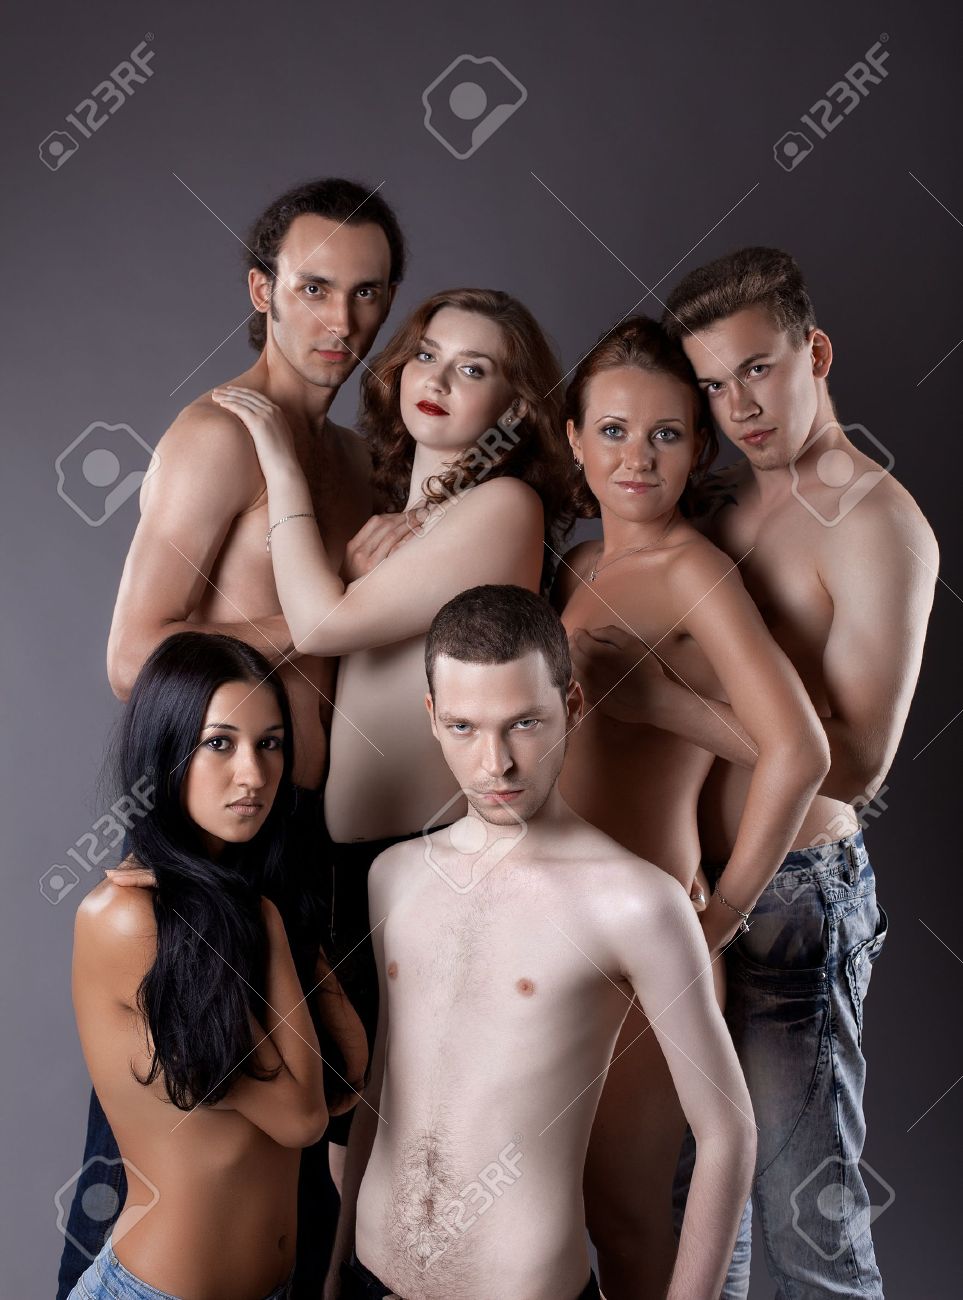 group of sexy half-nude people posing in jeans